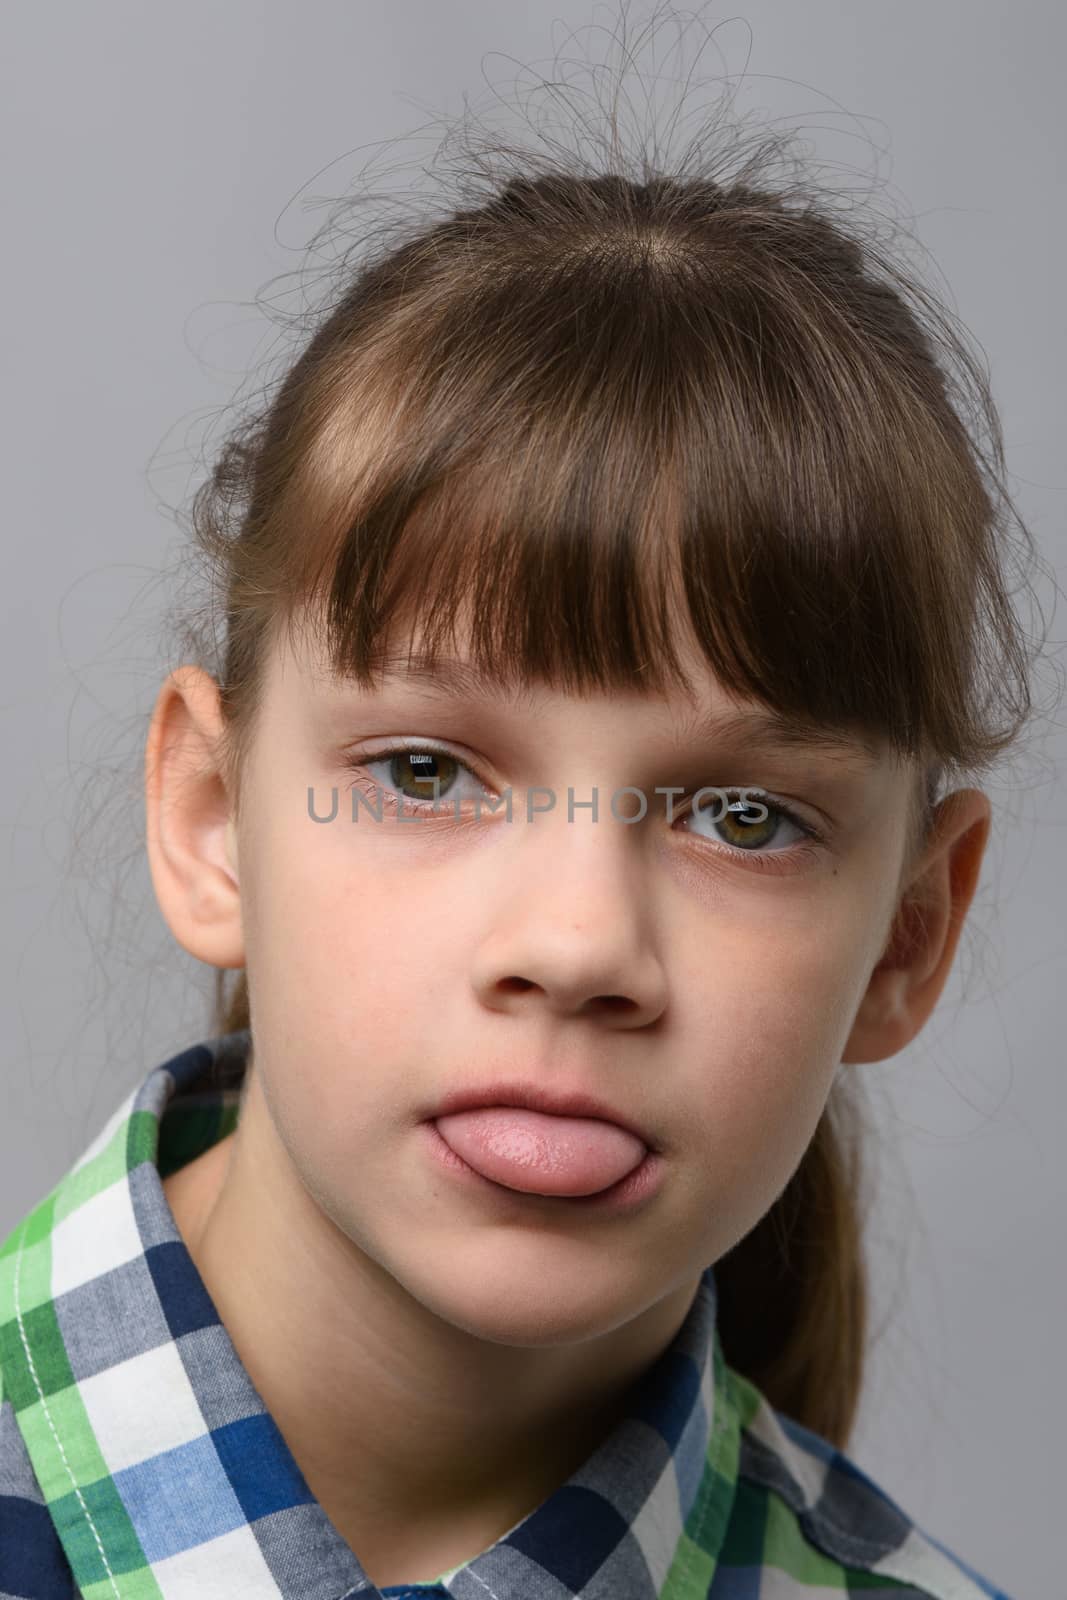 Portrait of a ten-year-old girl sticking out her tongue from resentment, European appearance, close-up